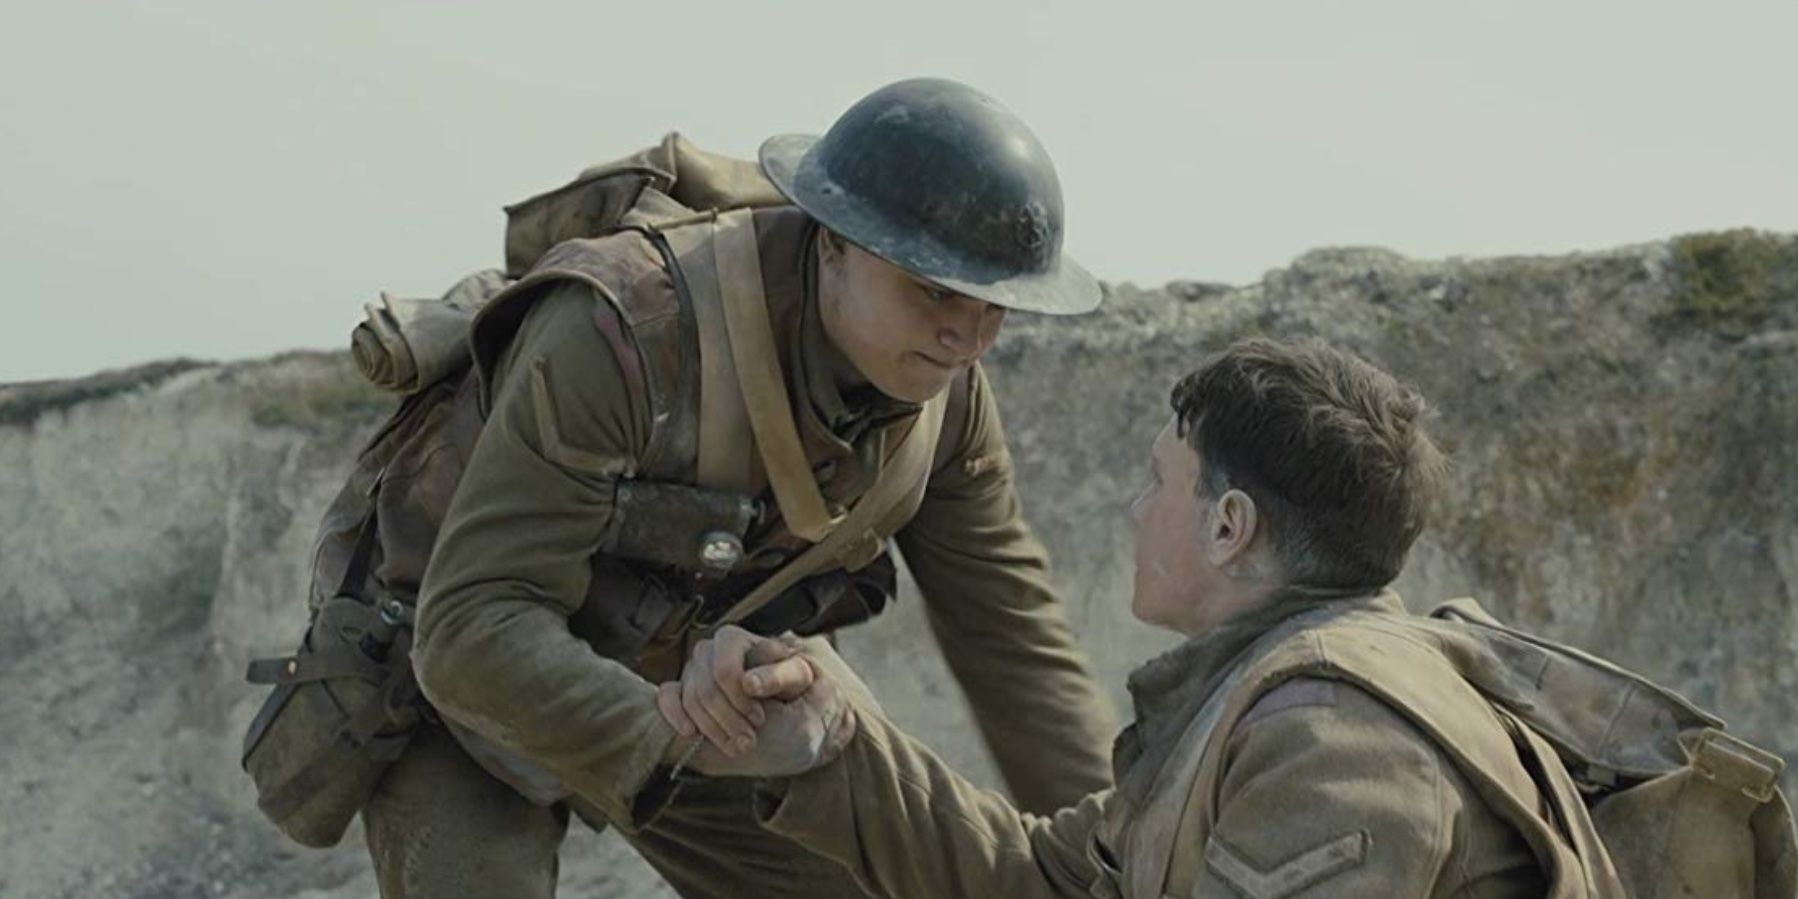 Dean-Charles Chapman and George MacKay as Tom Blake and William Schofield in the trenches of '1917'